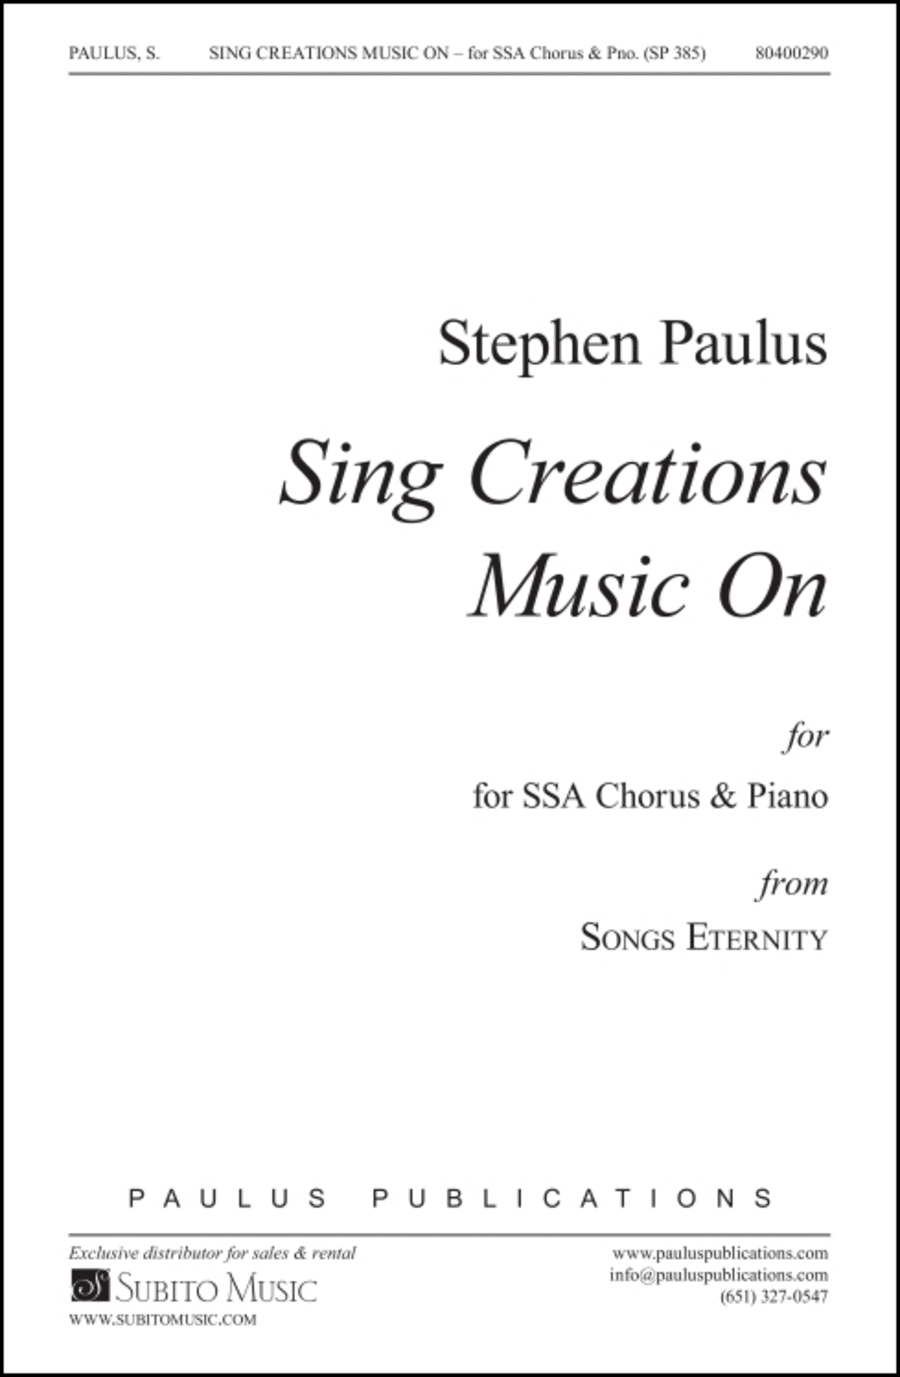 Sing Creations Music On (SONGS ETERNITY)